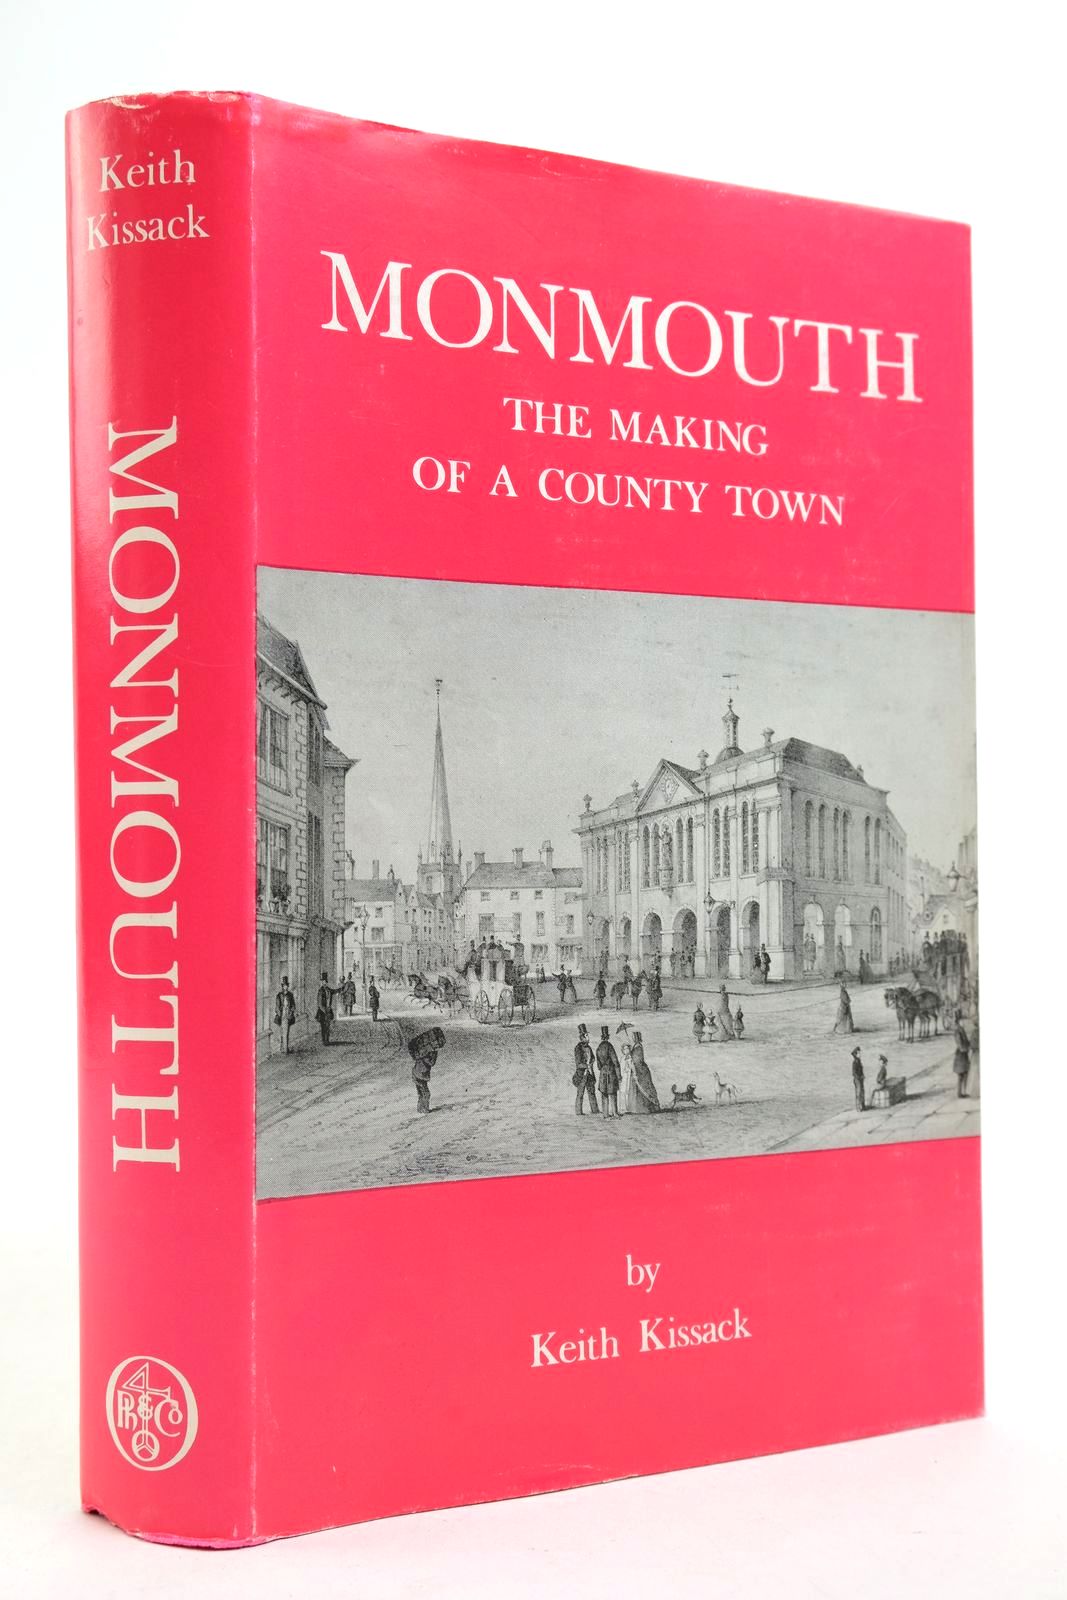 Photo of MONMOUTH THE MAKING OF A COUNTY TOWN written by Kissack, Keith published by Phillimore (STOCK CODE: 2140668)  for sale by Stella & Rose's Books